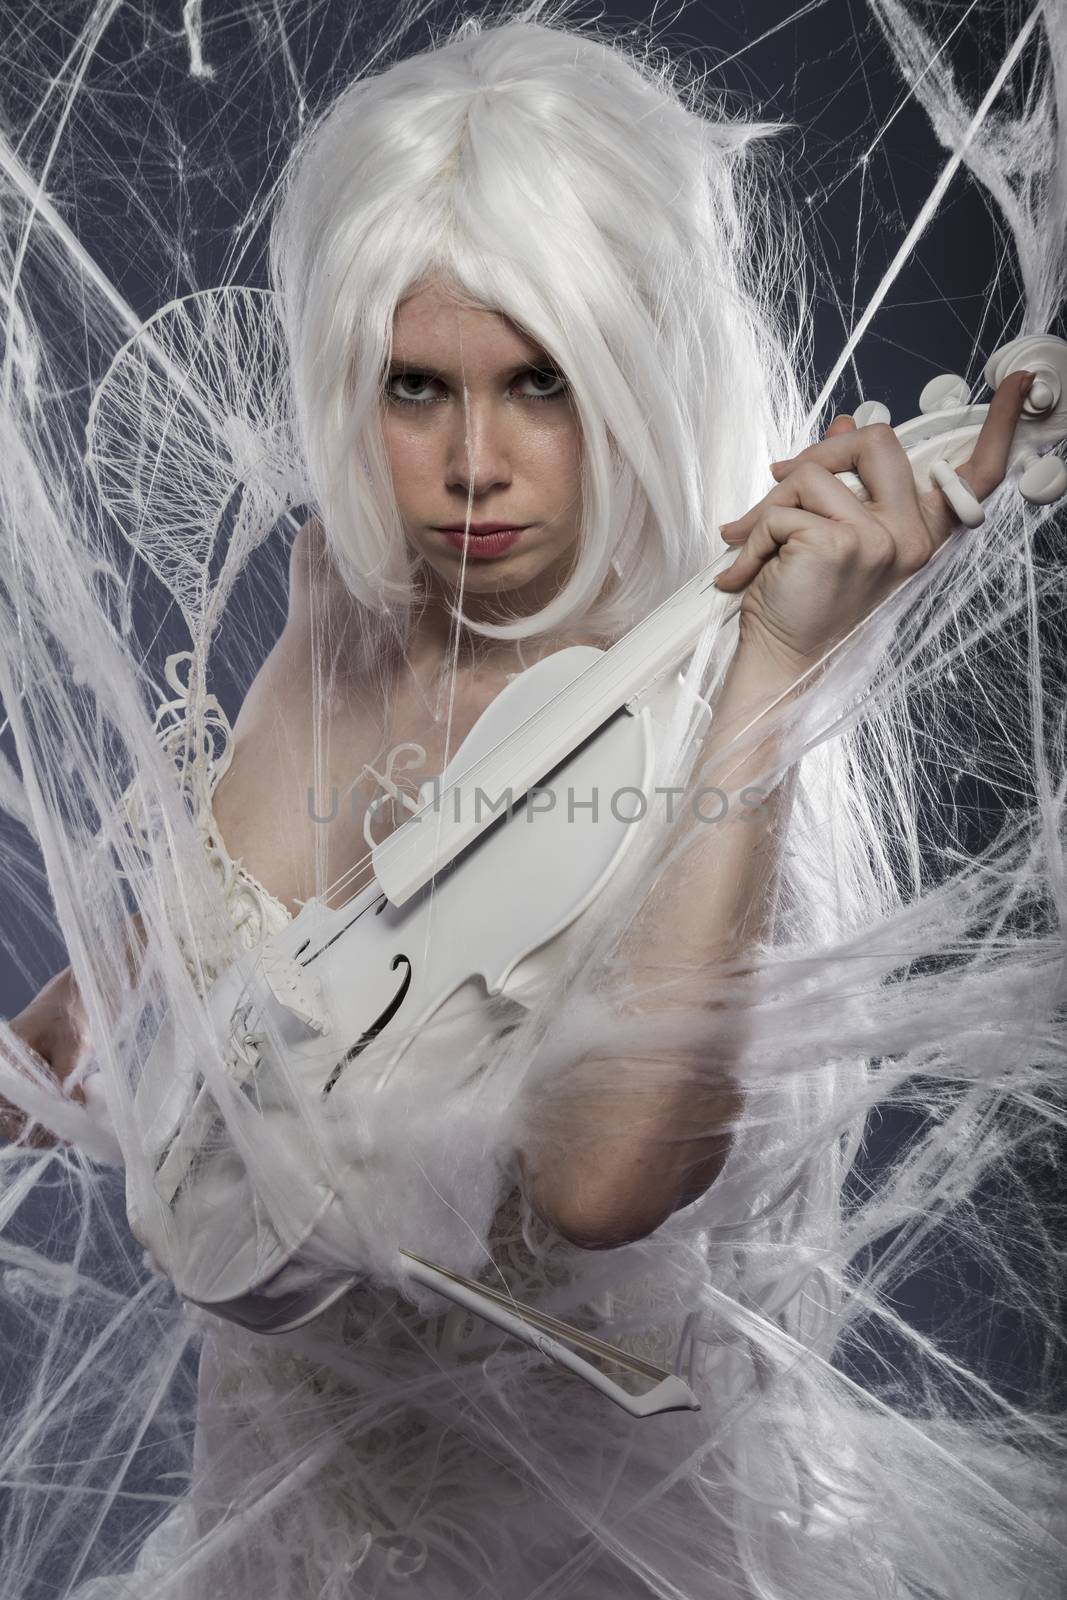 Pretty beautiful woman with couture gown in white, violin, music by FernandoCortes